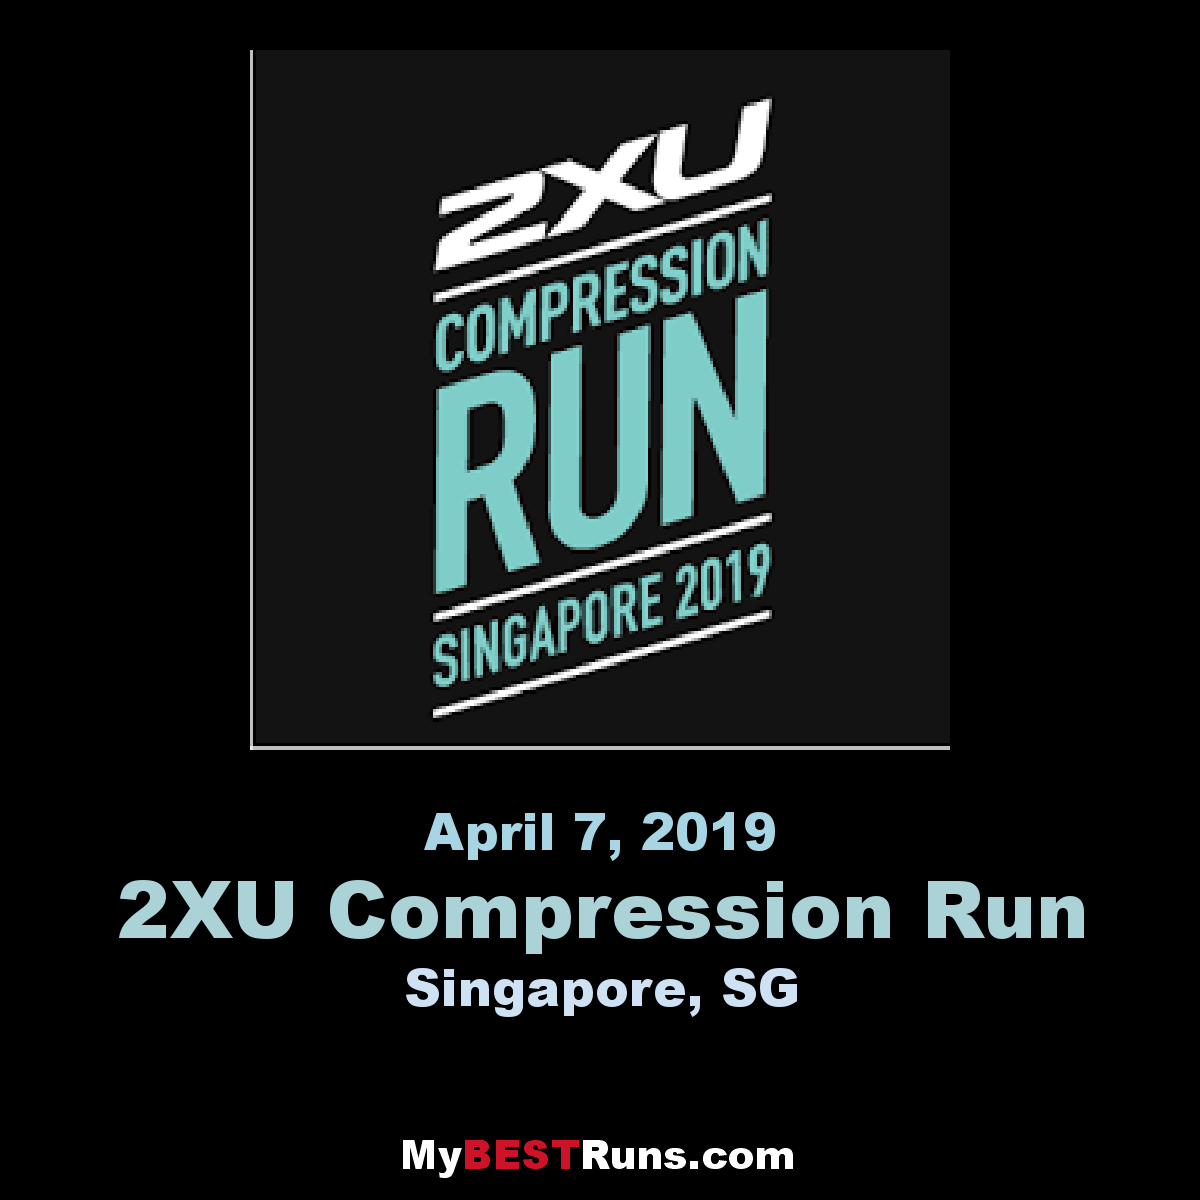 Diktatur Breddegrad Bounce Race results for the 2XU Compression Run Singapore 2019 held April 7 have  not been released due to payment issues - Running News Daily by My BEST  Runs - My BEST Runs -